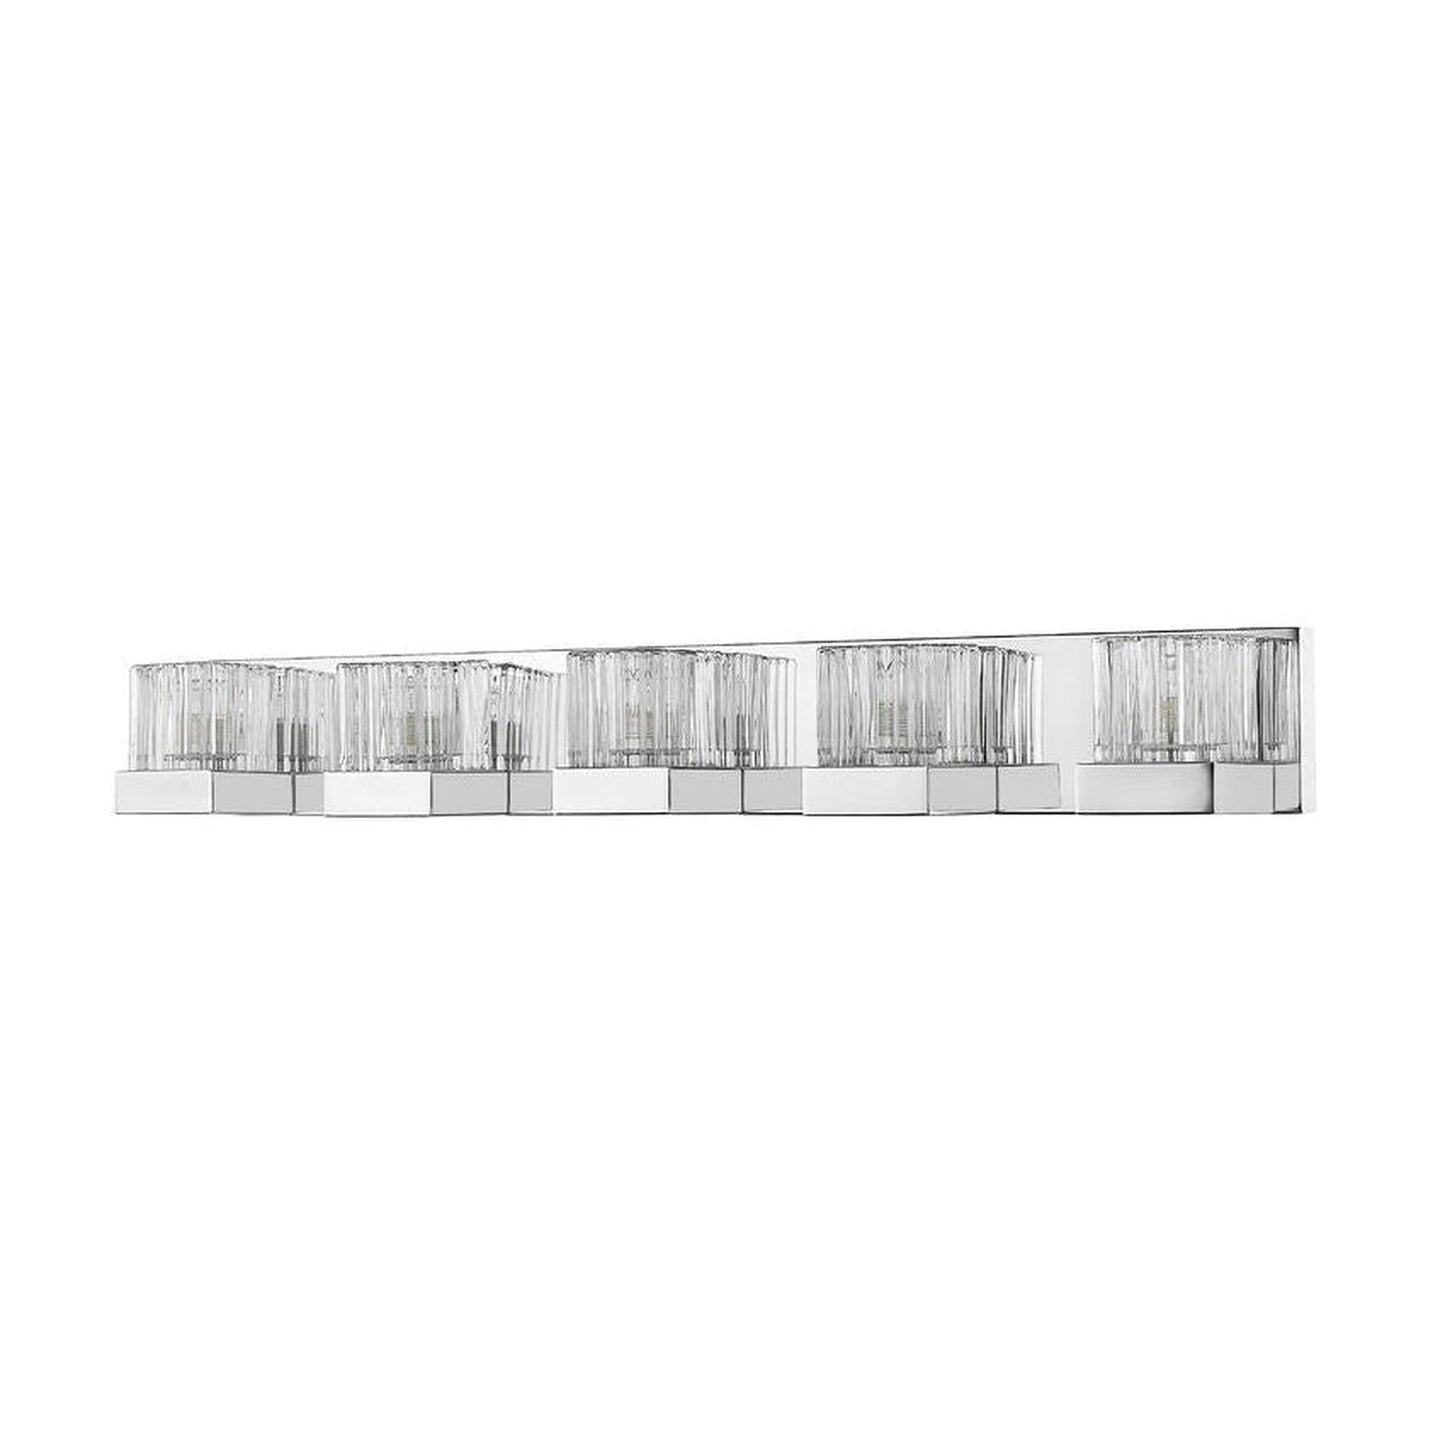 Z-Lite Fallon 34" 5-Light Chrome Vanity Light With Clear Ribbed and Frosted Crystal Shade